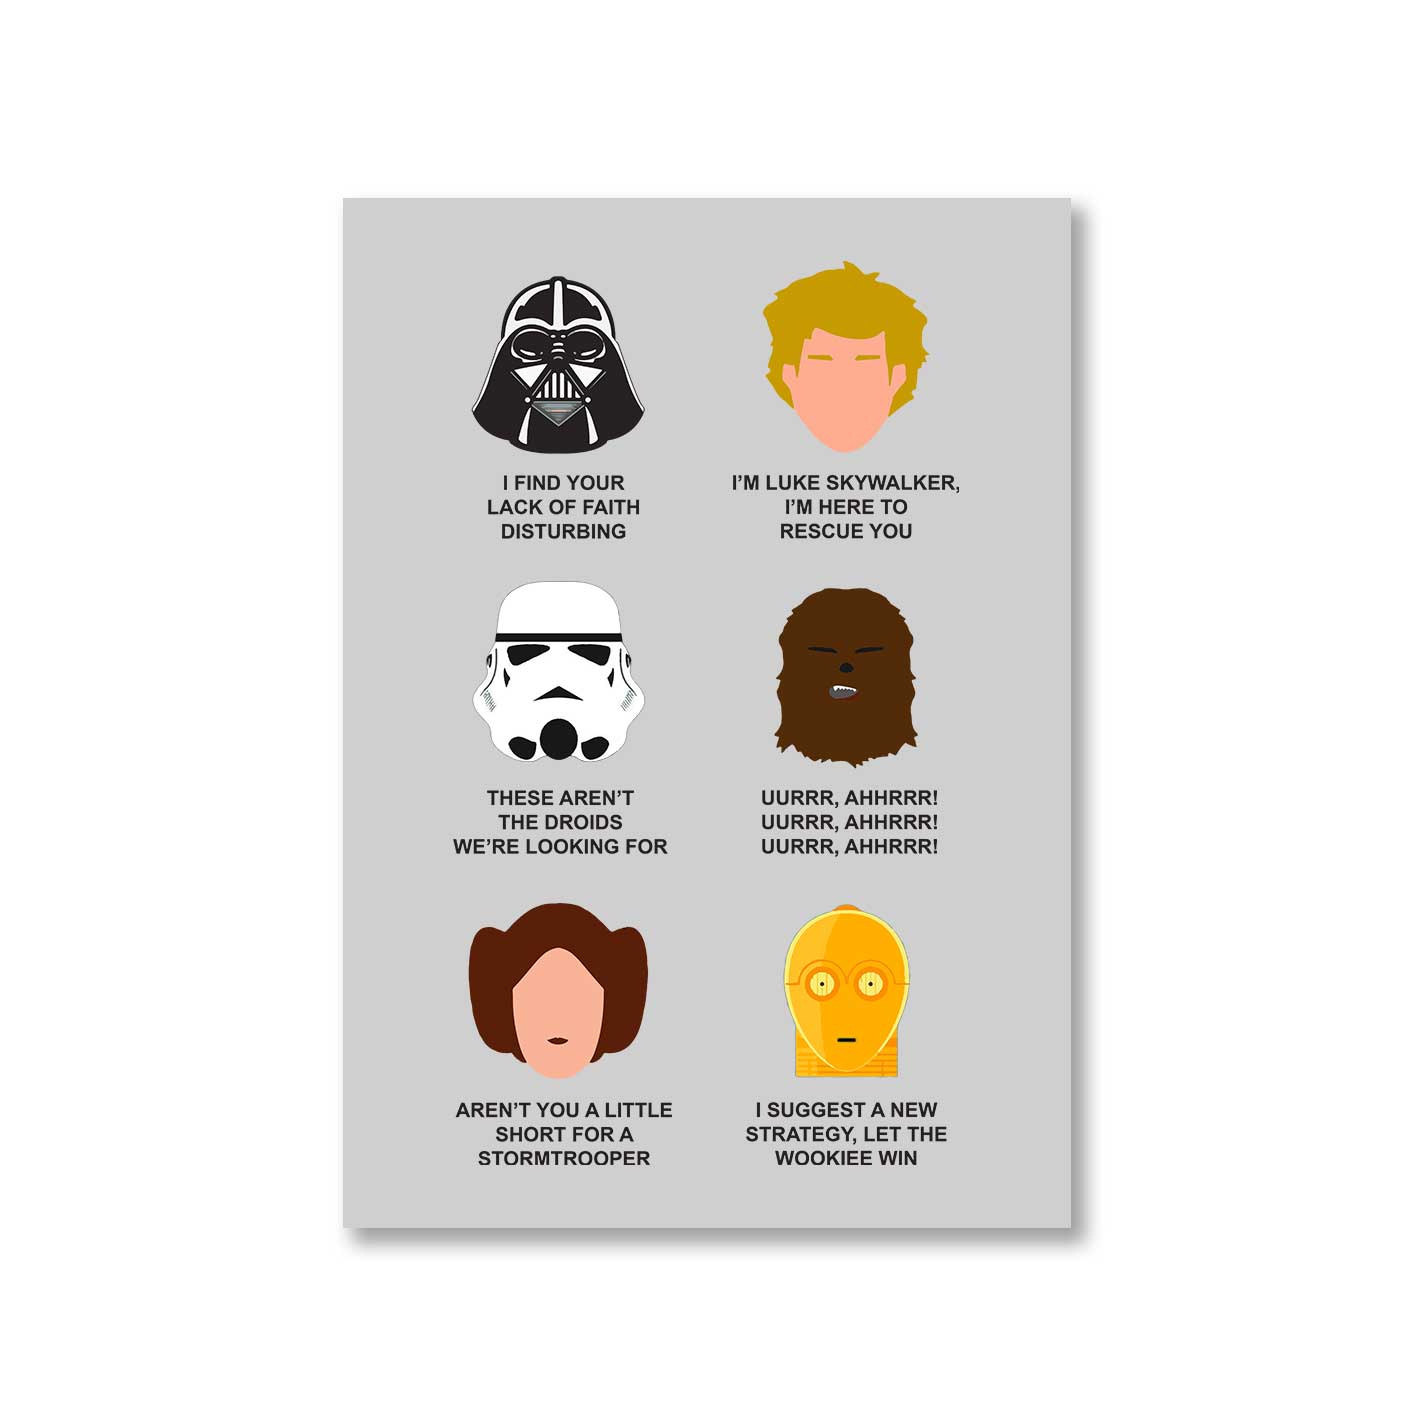 star wars who said what poster wall art buy online india the banyan tee tbt a4 dialogues